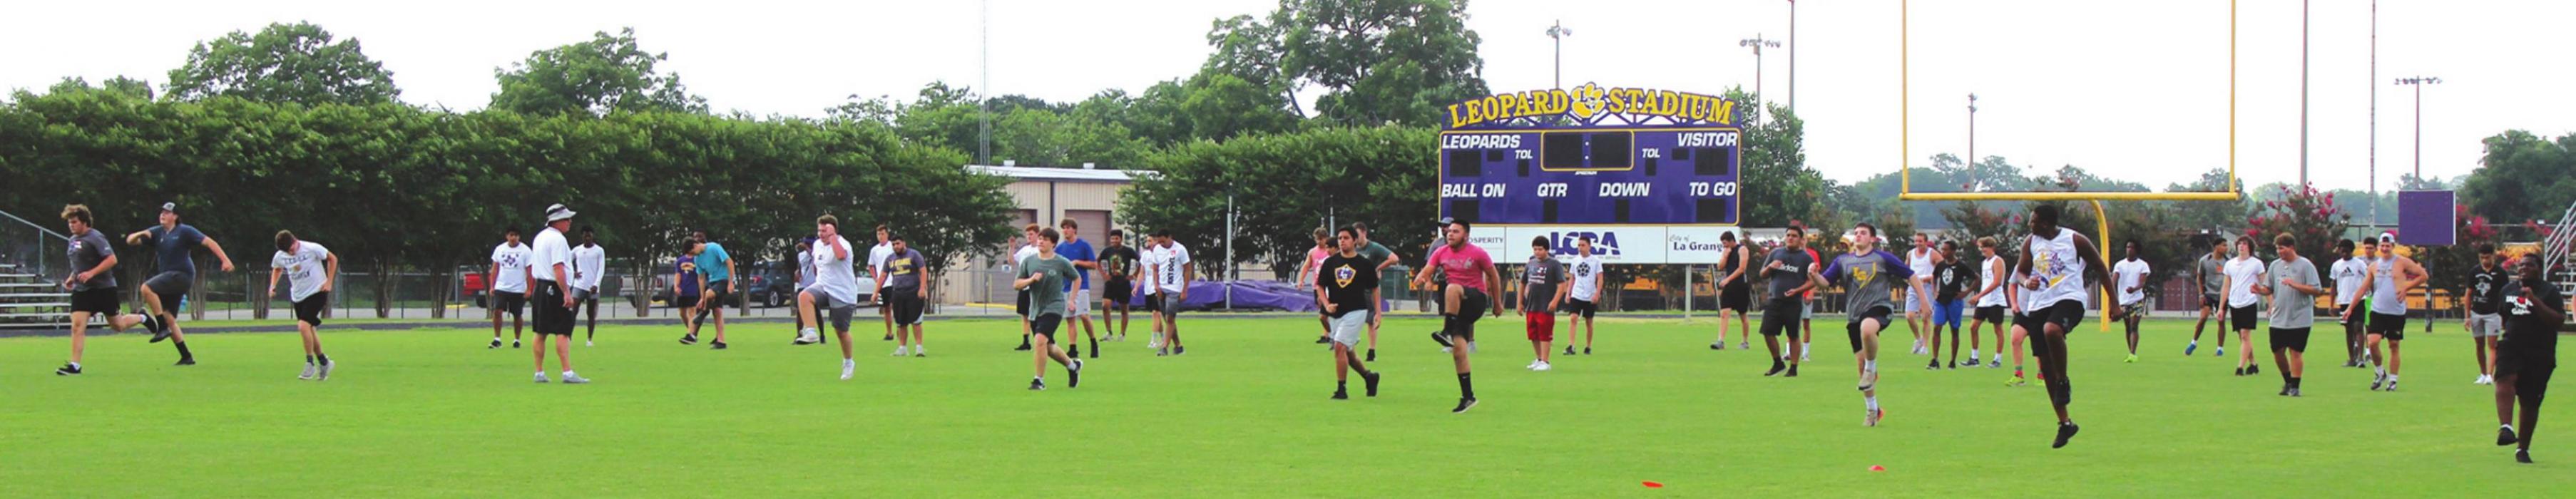 La Grange high school football players go through stretching drills Tuesday morning at Leopard Stadium. Photo by Jeff Wick